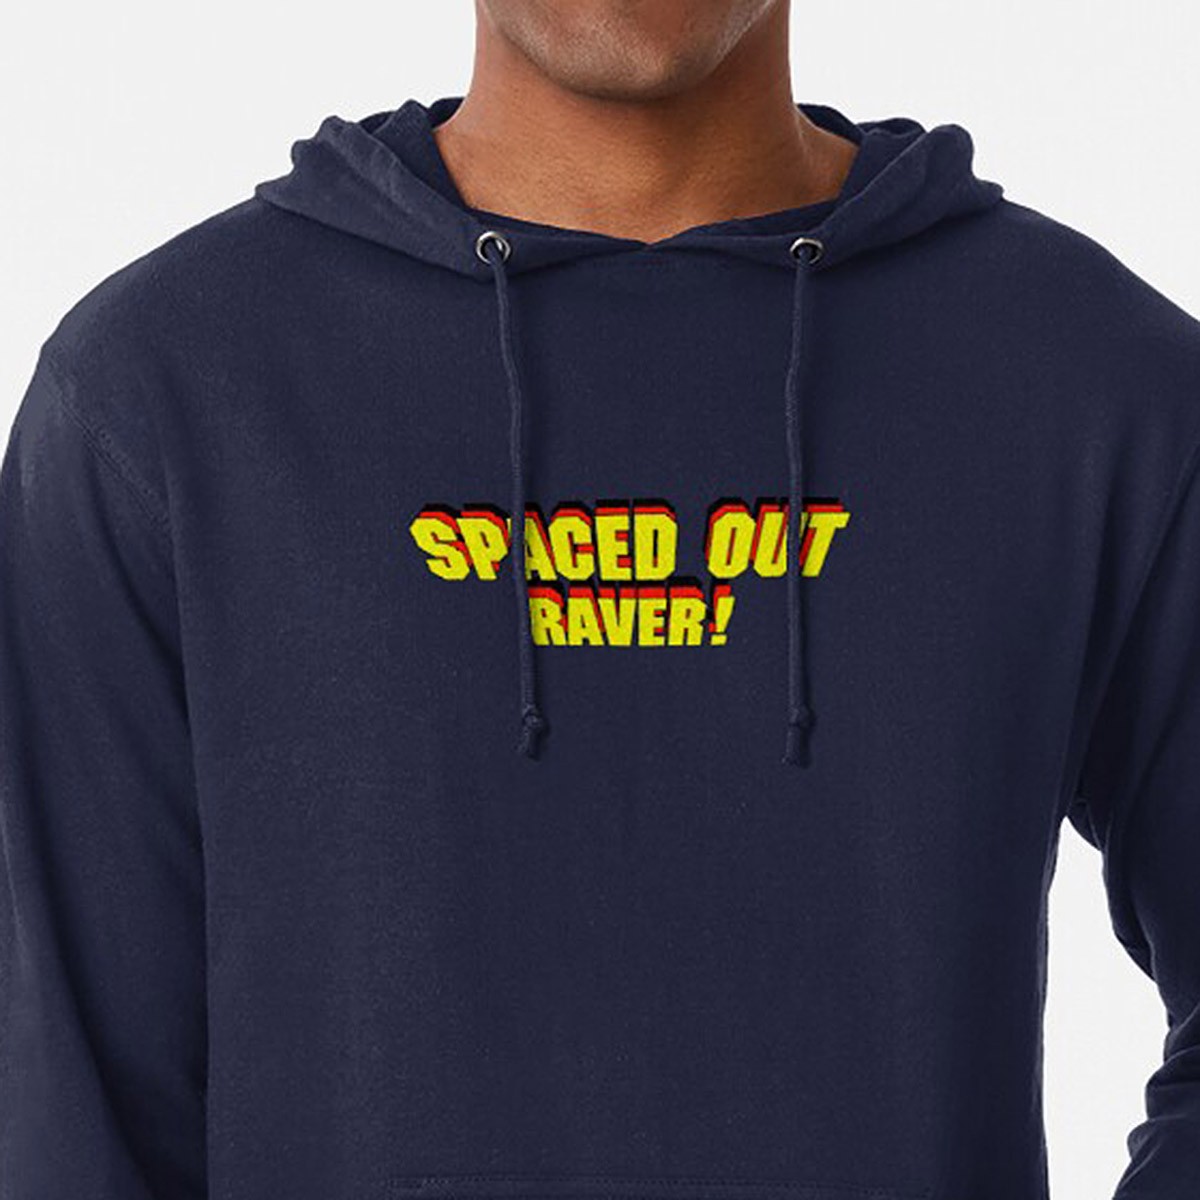 Spaced Out Raver!  - Lightweight Hoodie - 